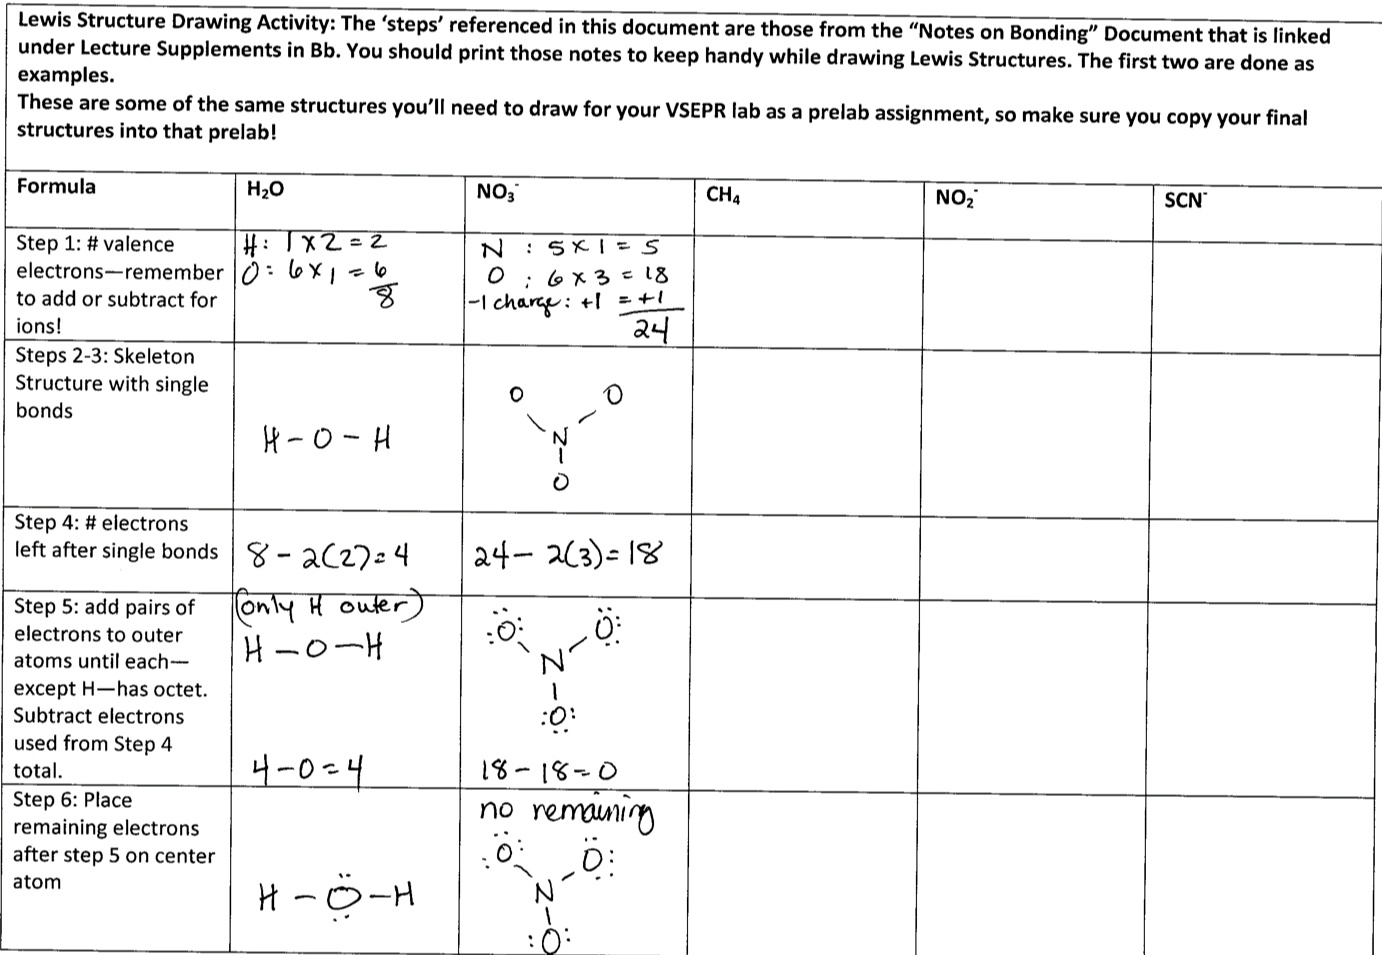 Lewis Structure Drawing Activity